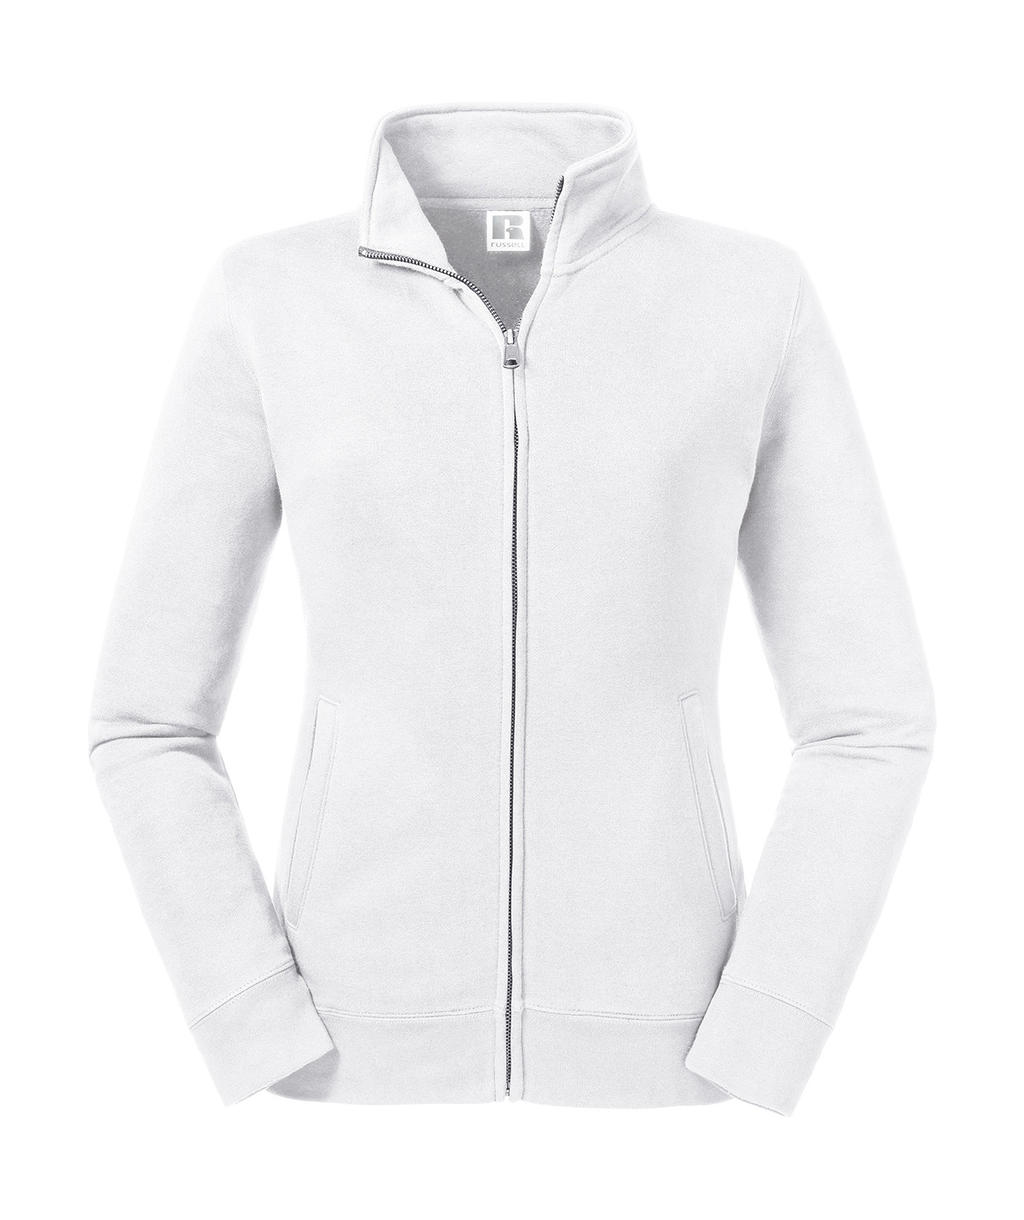  Ladies Authentic Sweat Jacket in Farbe White